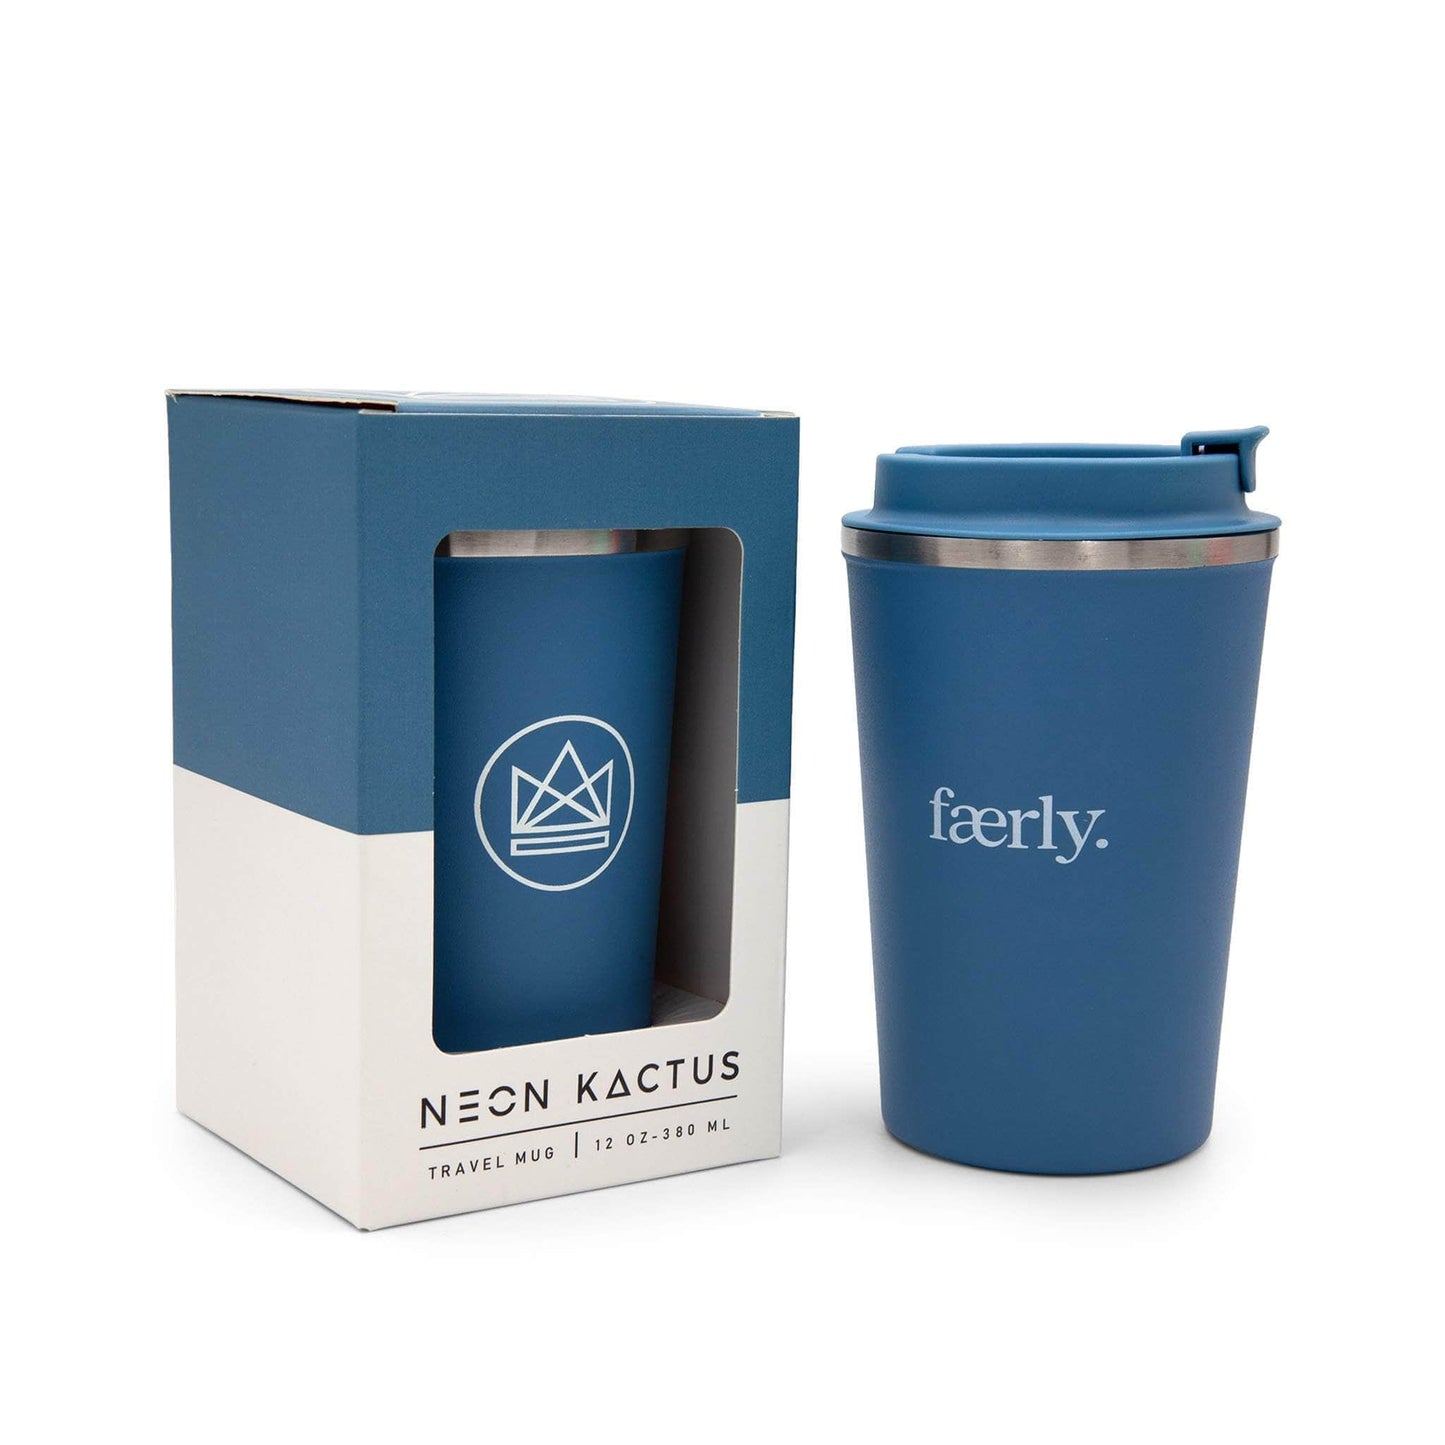 Neon Kactus Coffee Cup Stainless Steel Insulated Coffee Cup - 12oz - Super Sonic Pastel Blue